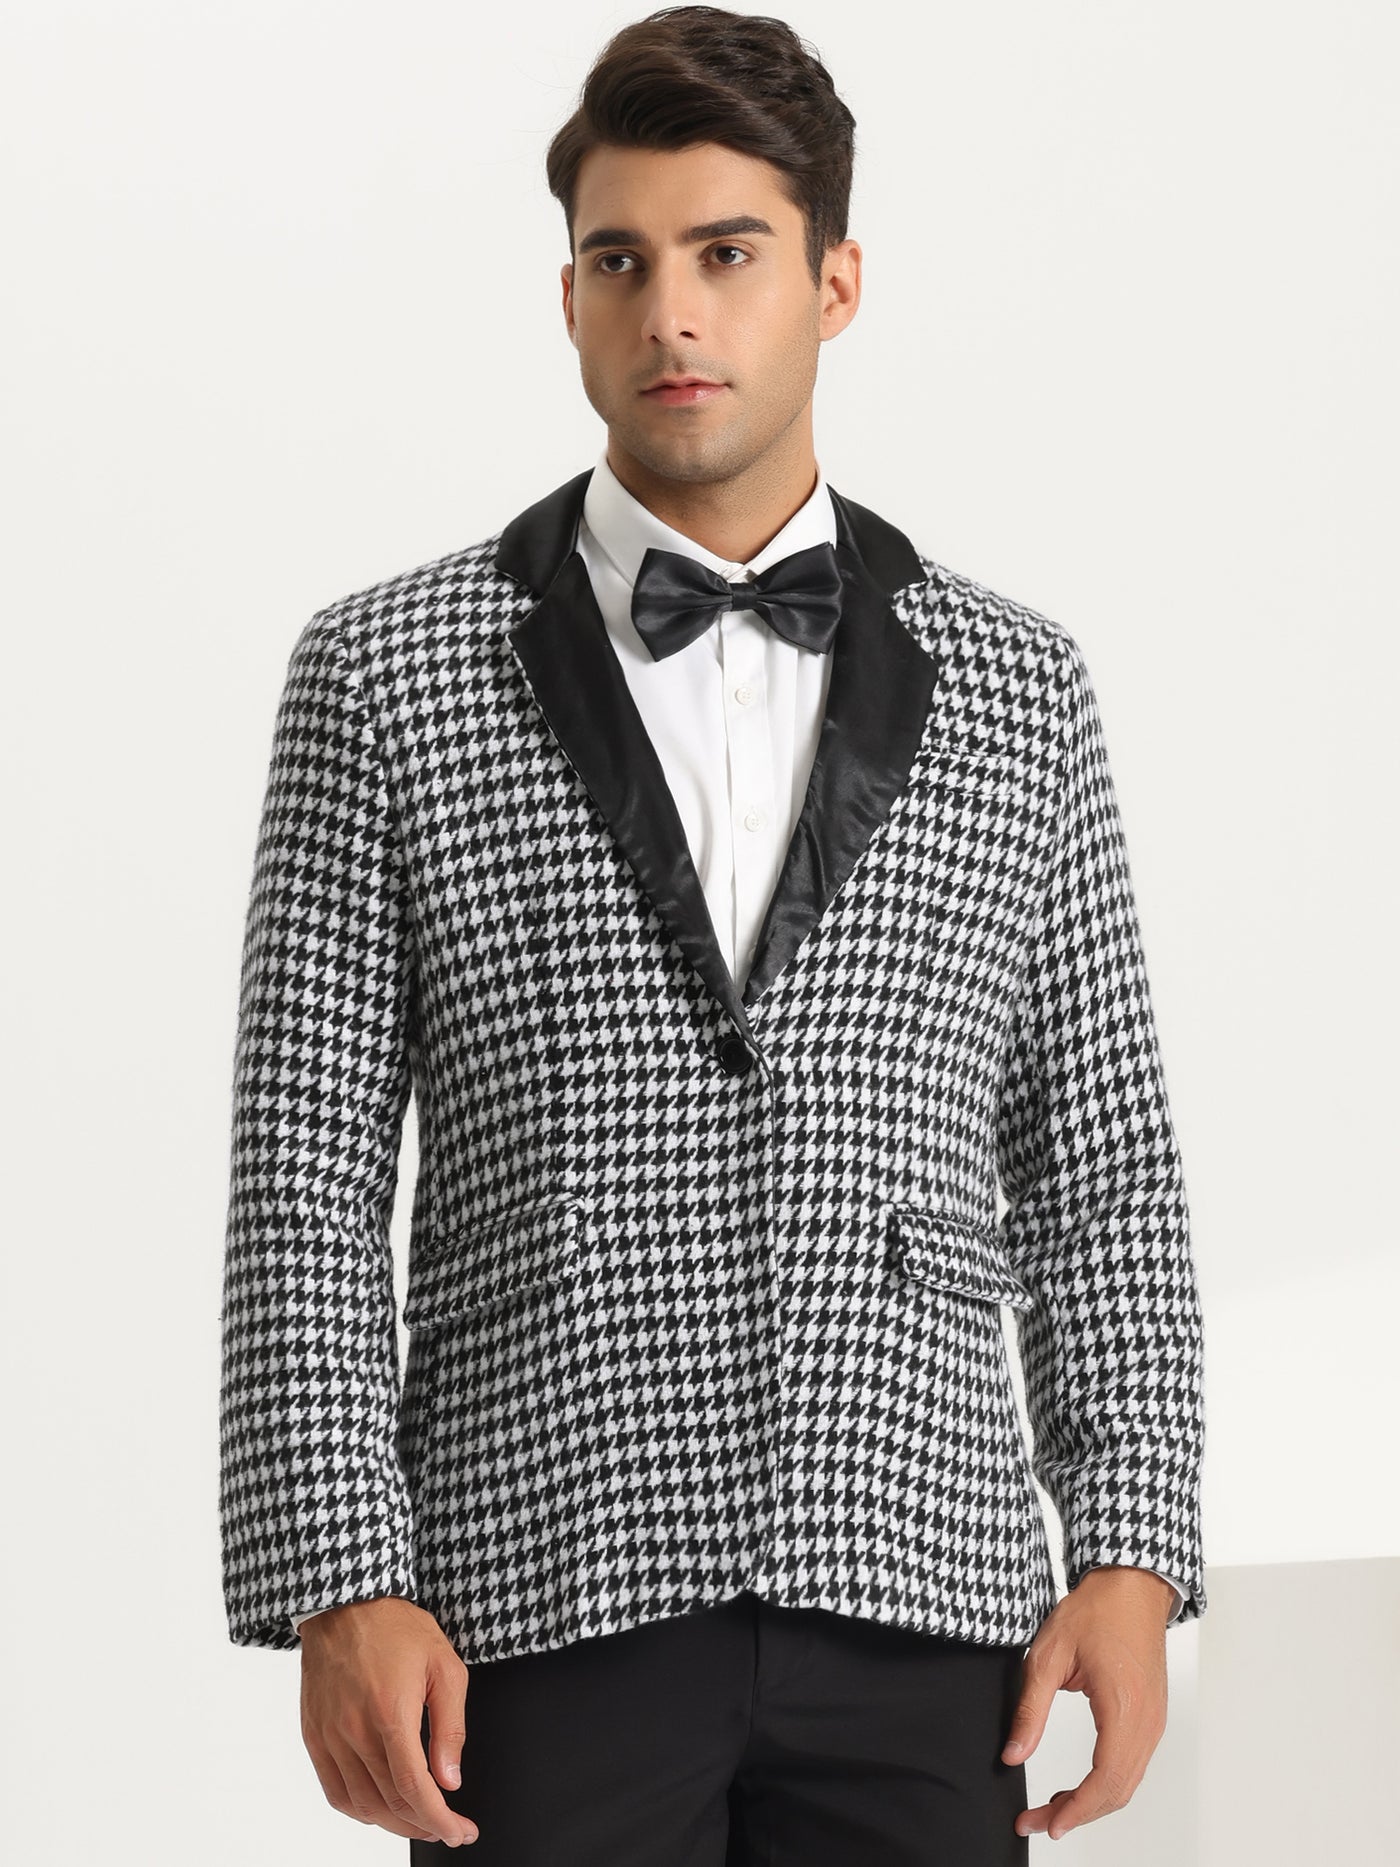 Bublédon Houndstooth Print Blazer for Men's Slim Fit Contrast Collared Plaid Sports Coat